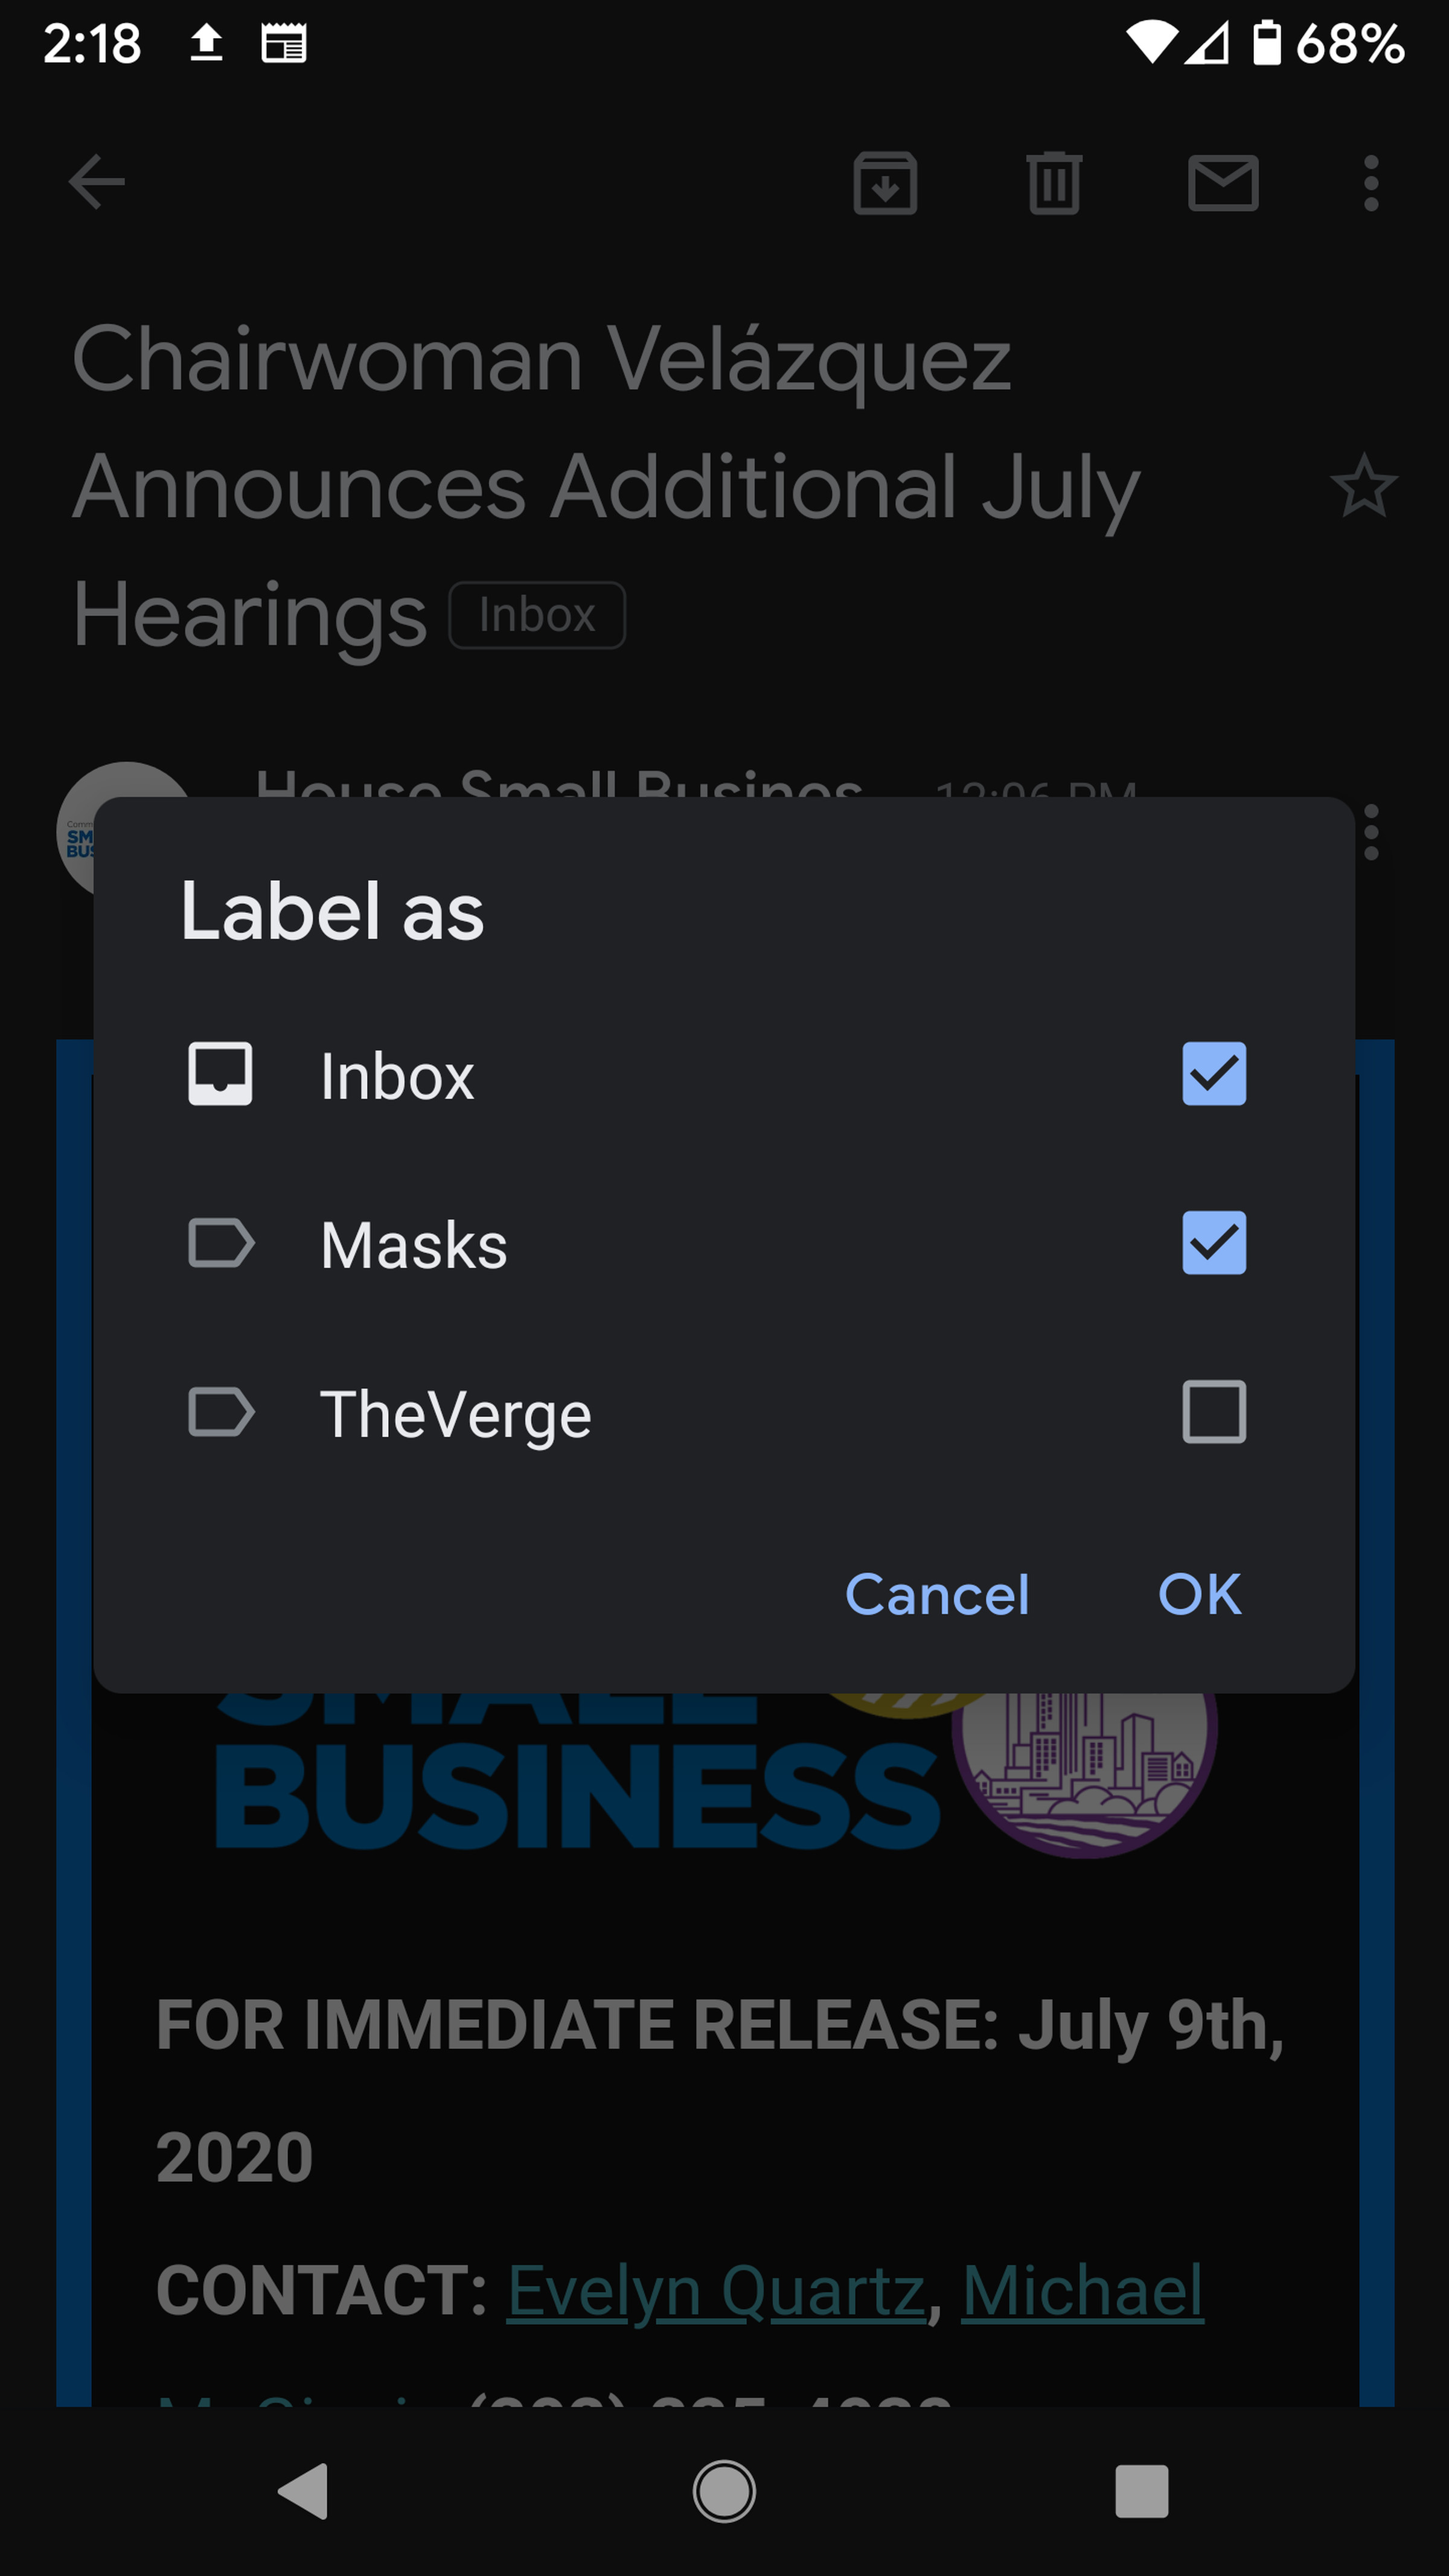 Select the labels you want to apply to the email.